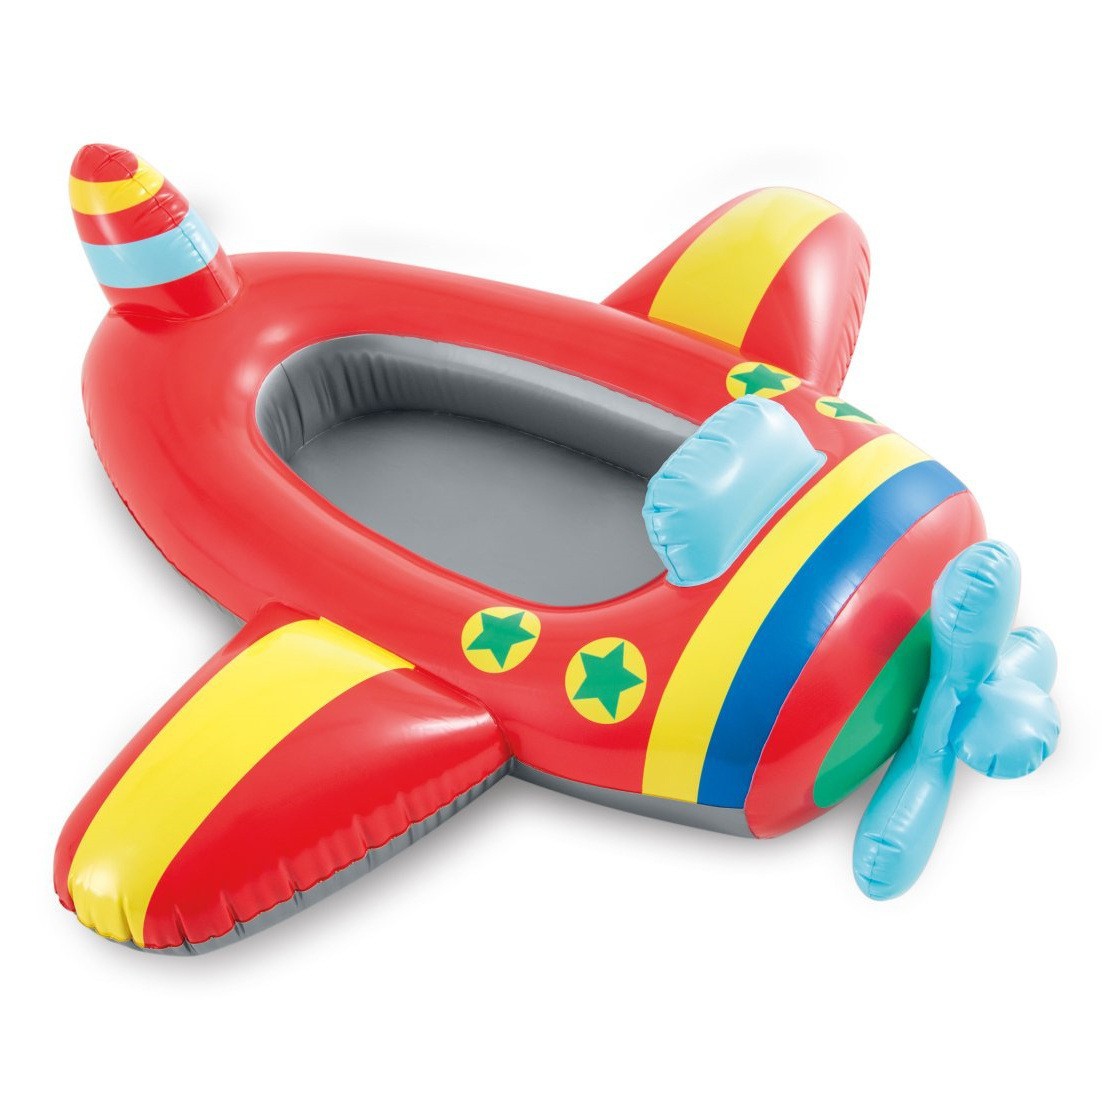 intex59380 children's water seat inflatable toys swimming swimming Mount water wholesale